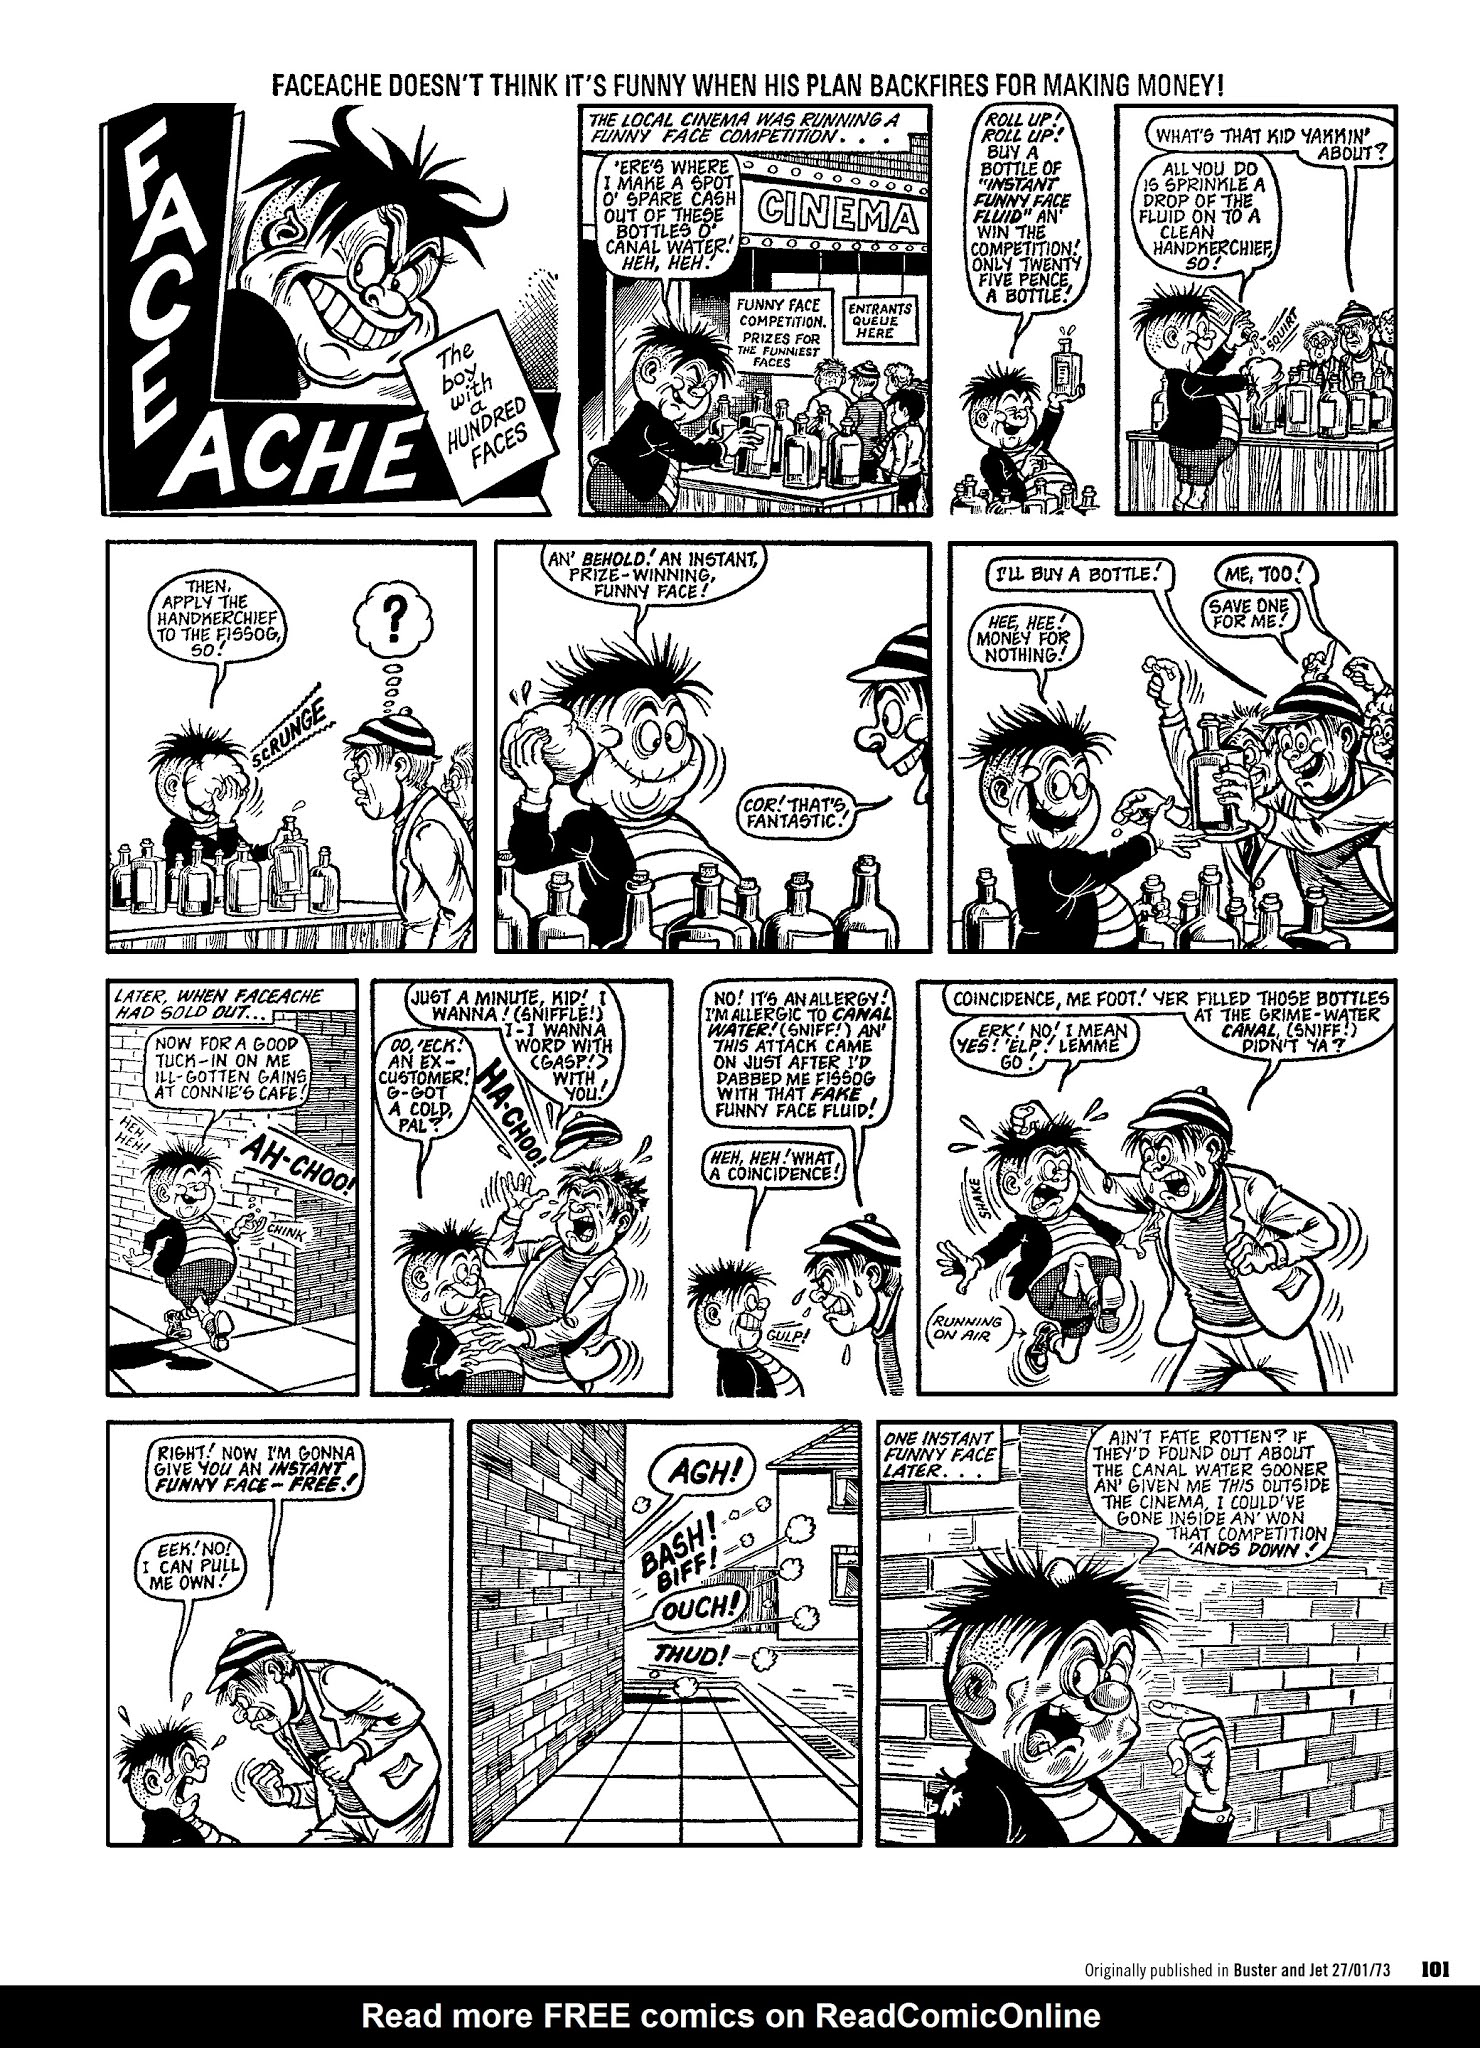 Read online Faceache: The First Hundred Scrunges comic -  Issue # TPB 1 - 103